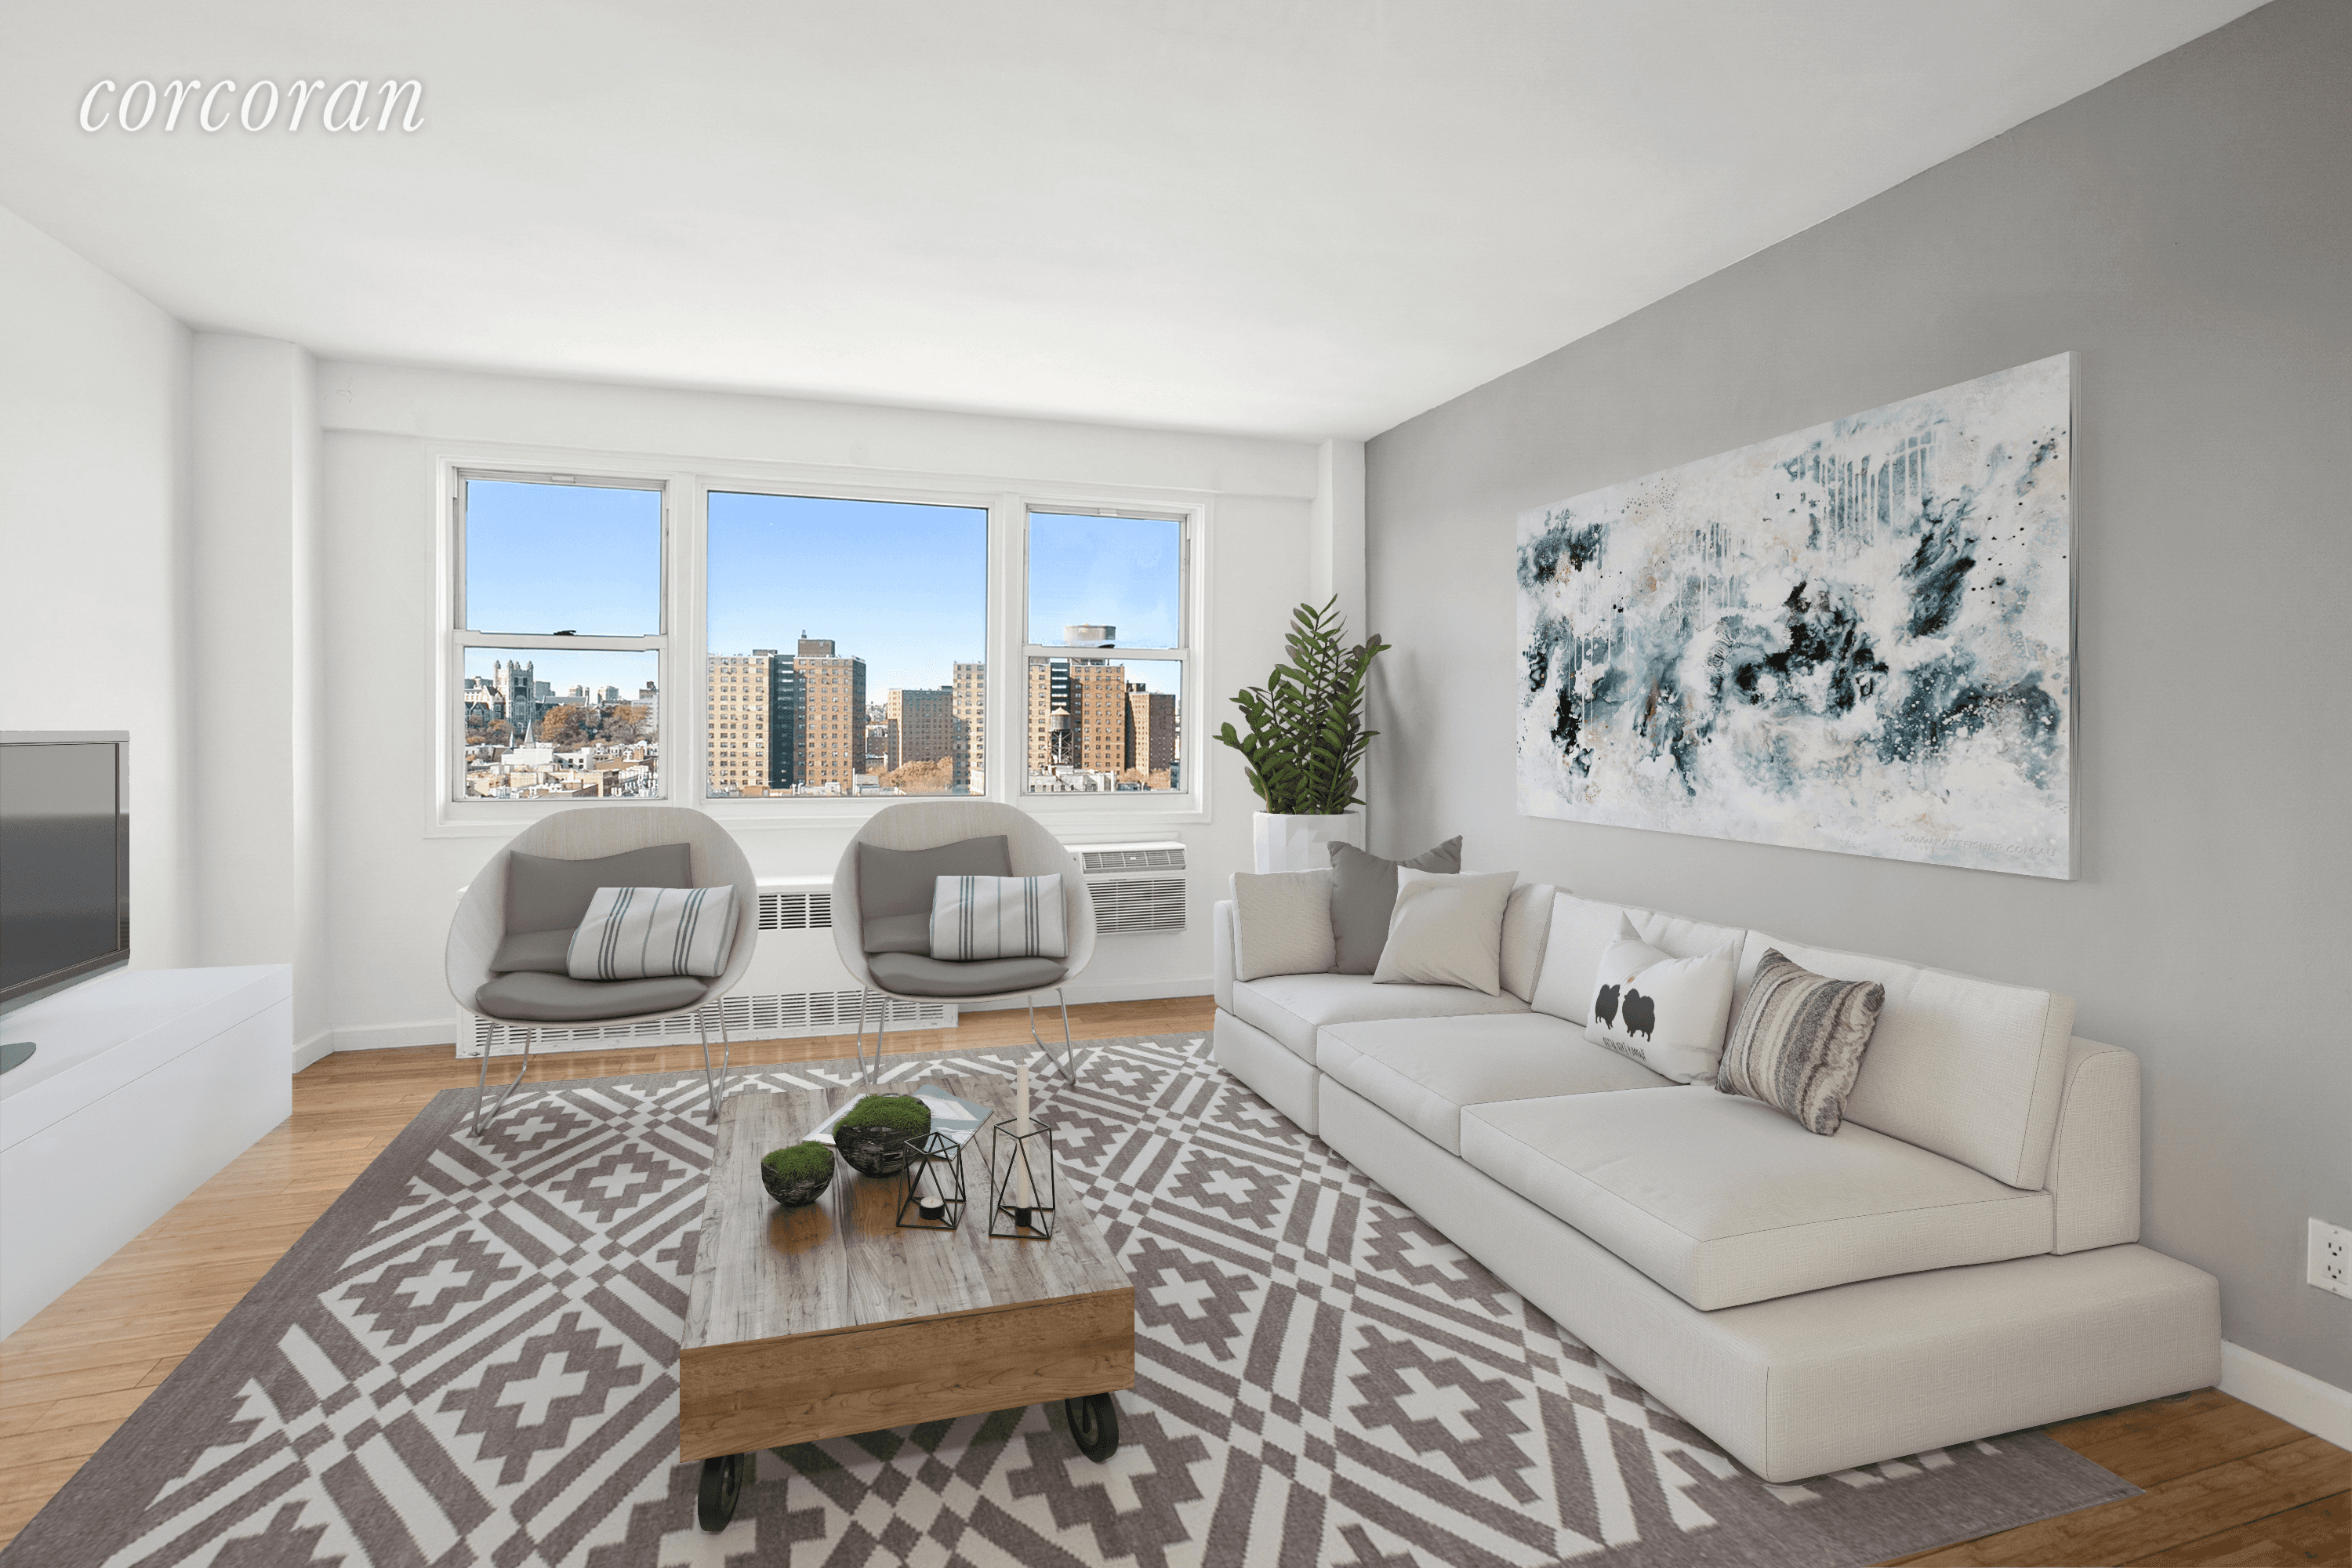 Apartment 3C is a lovely 1 bedroom unit available for rent in Central Harlem.